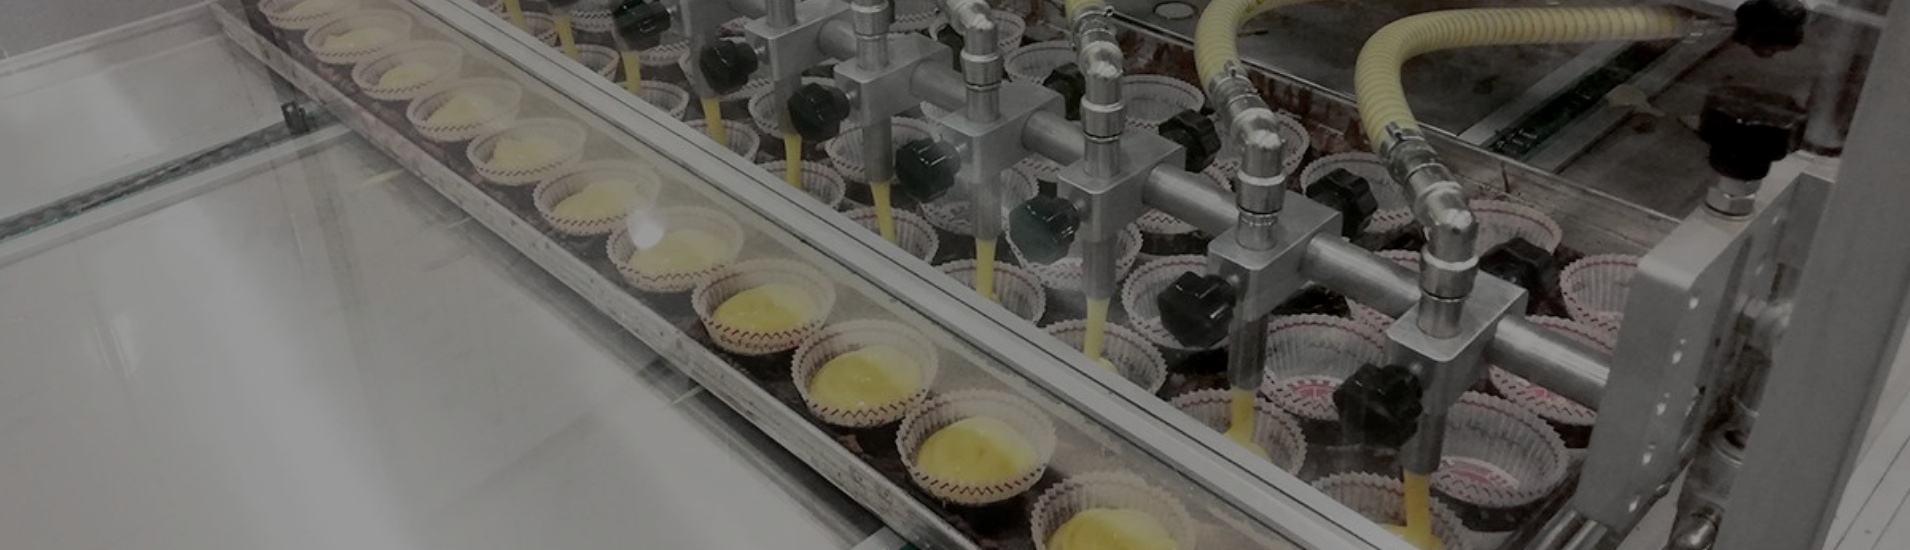 Cup Cake Packaging Machine